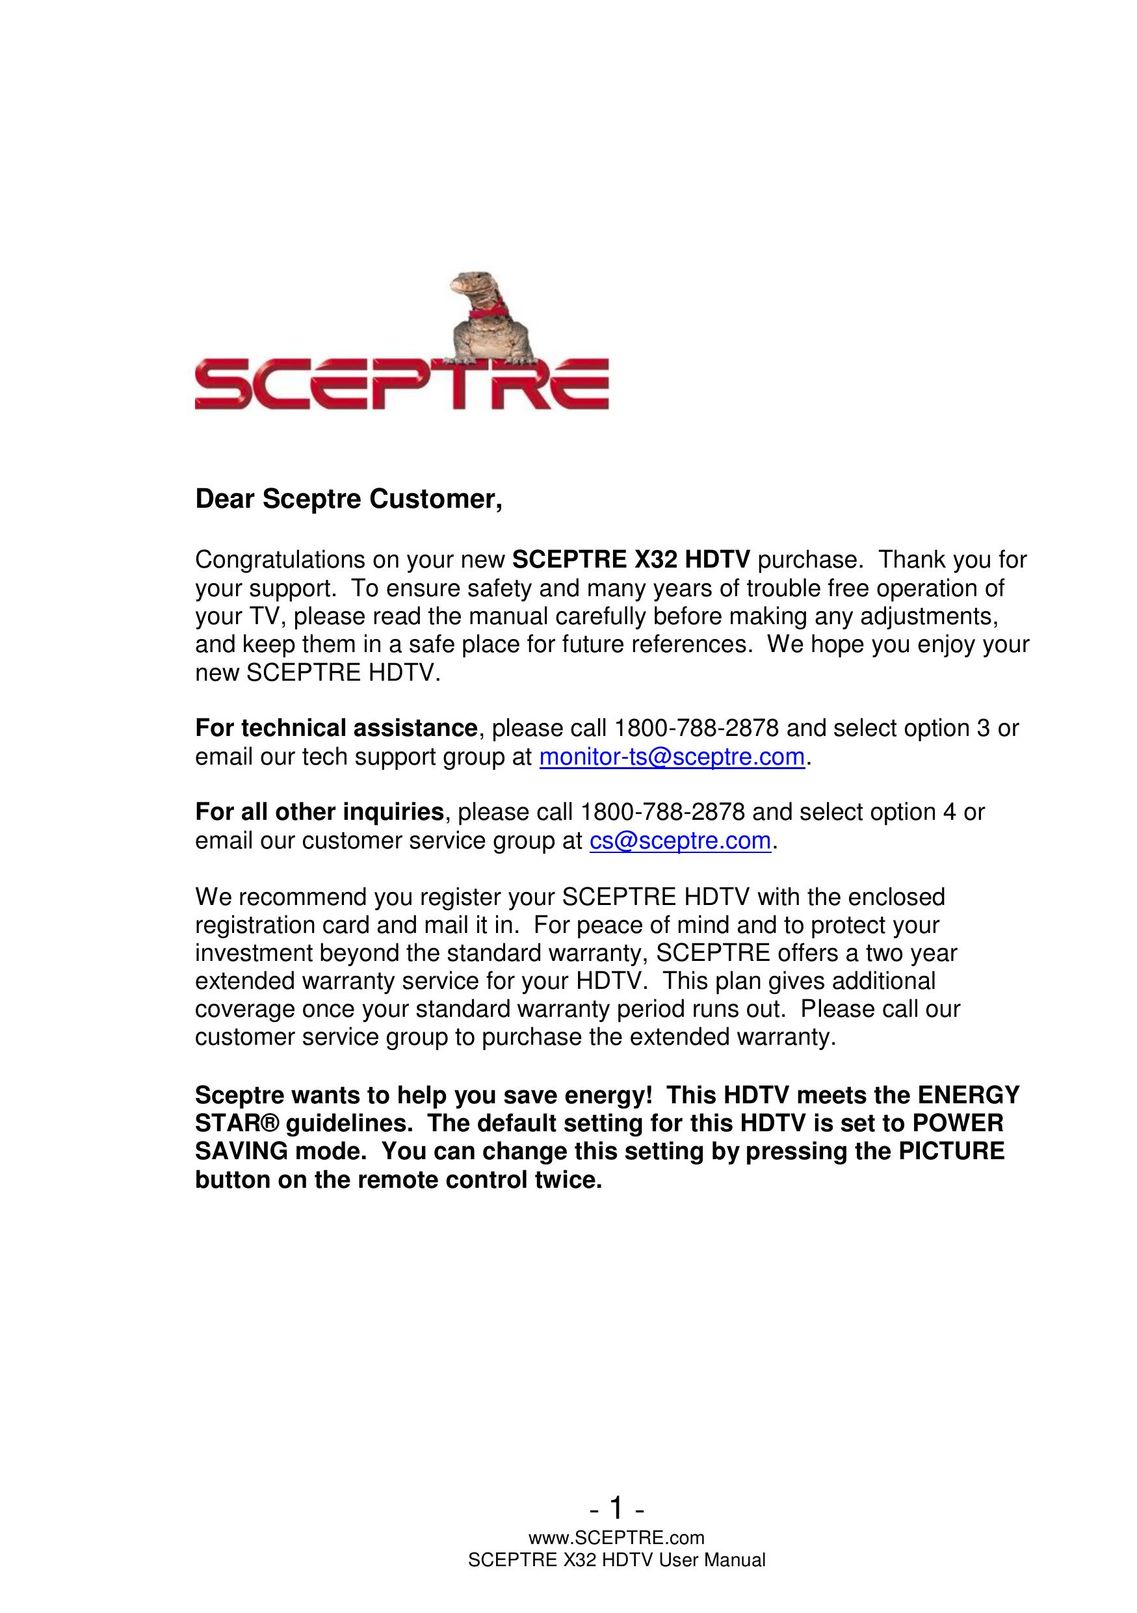 Sceptre Technologies x32 CRT Television User Manual